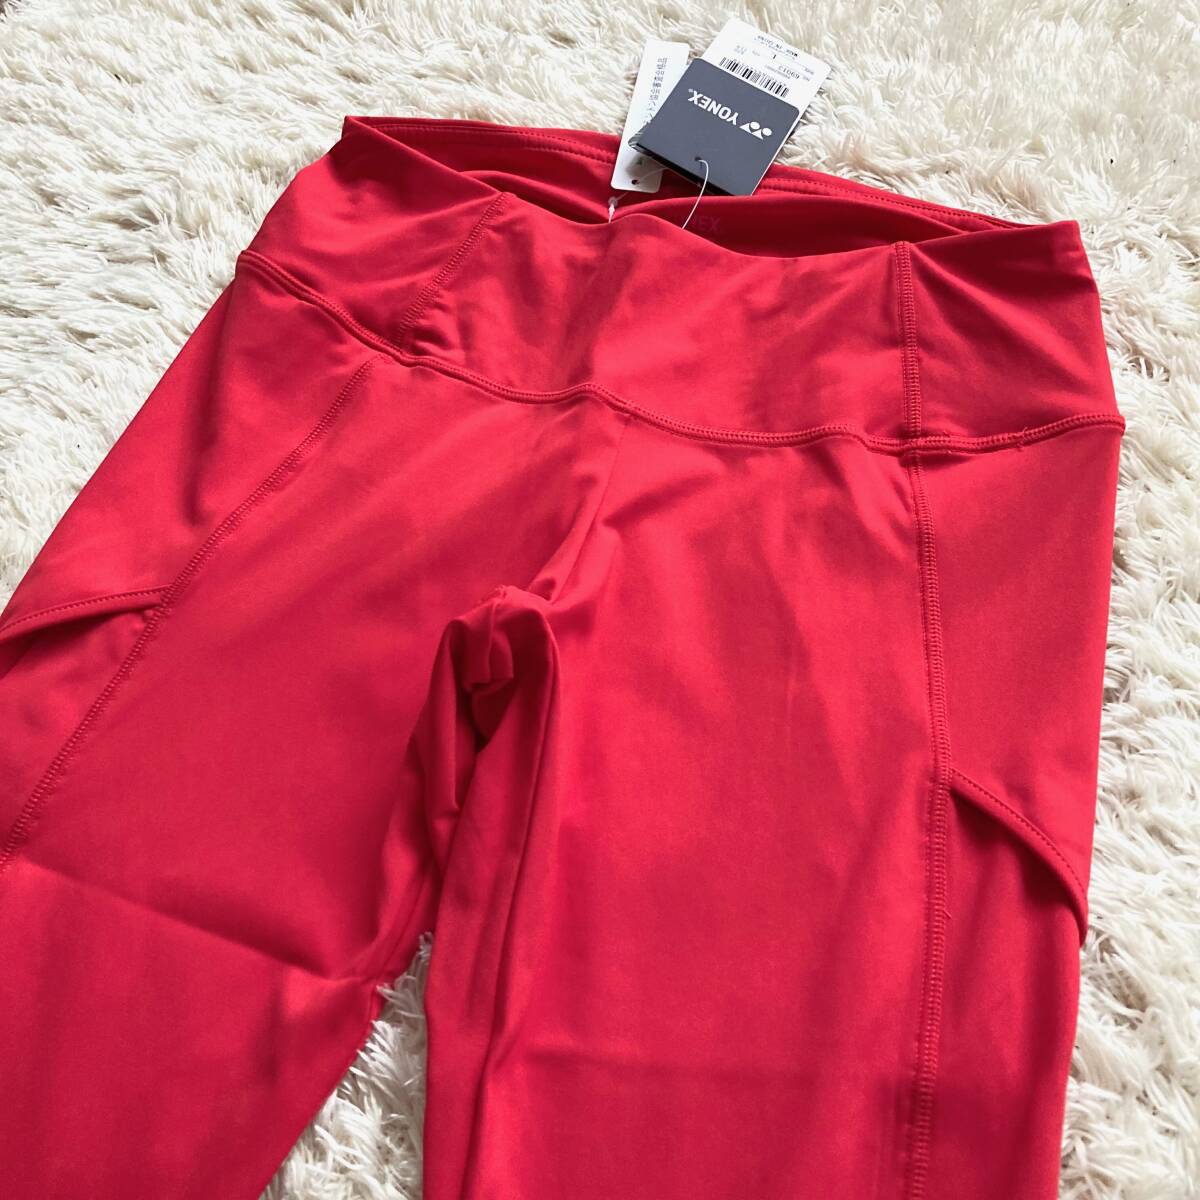  new goods unused YONEX Yonex 6 minute height leggings tights lady's L red spats red badminton tennis woman spring summer sport 